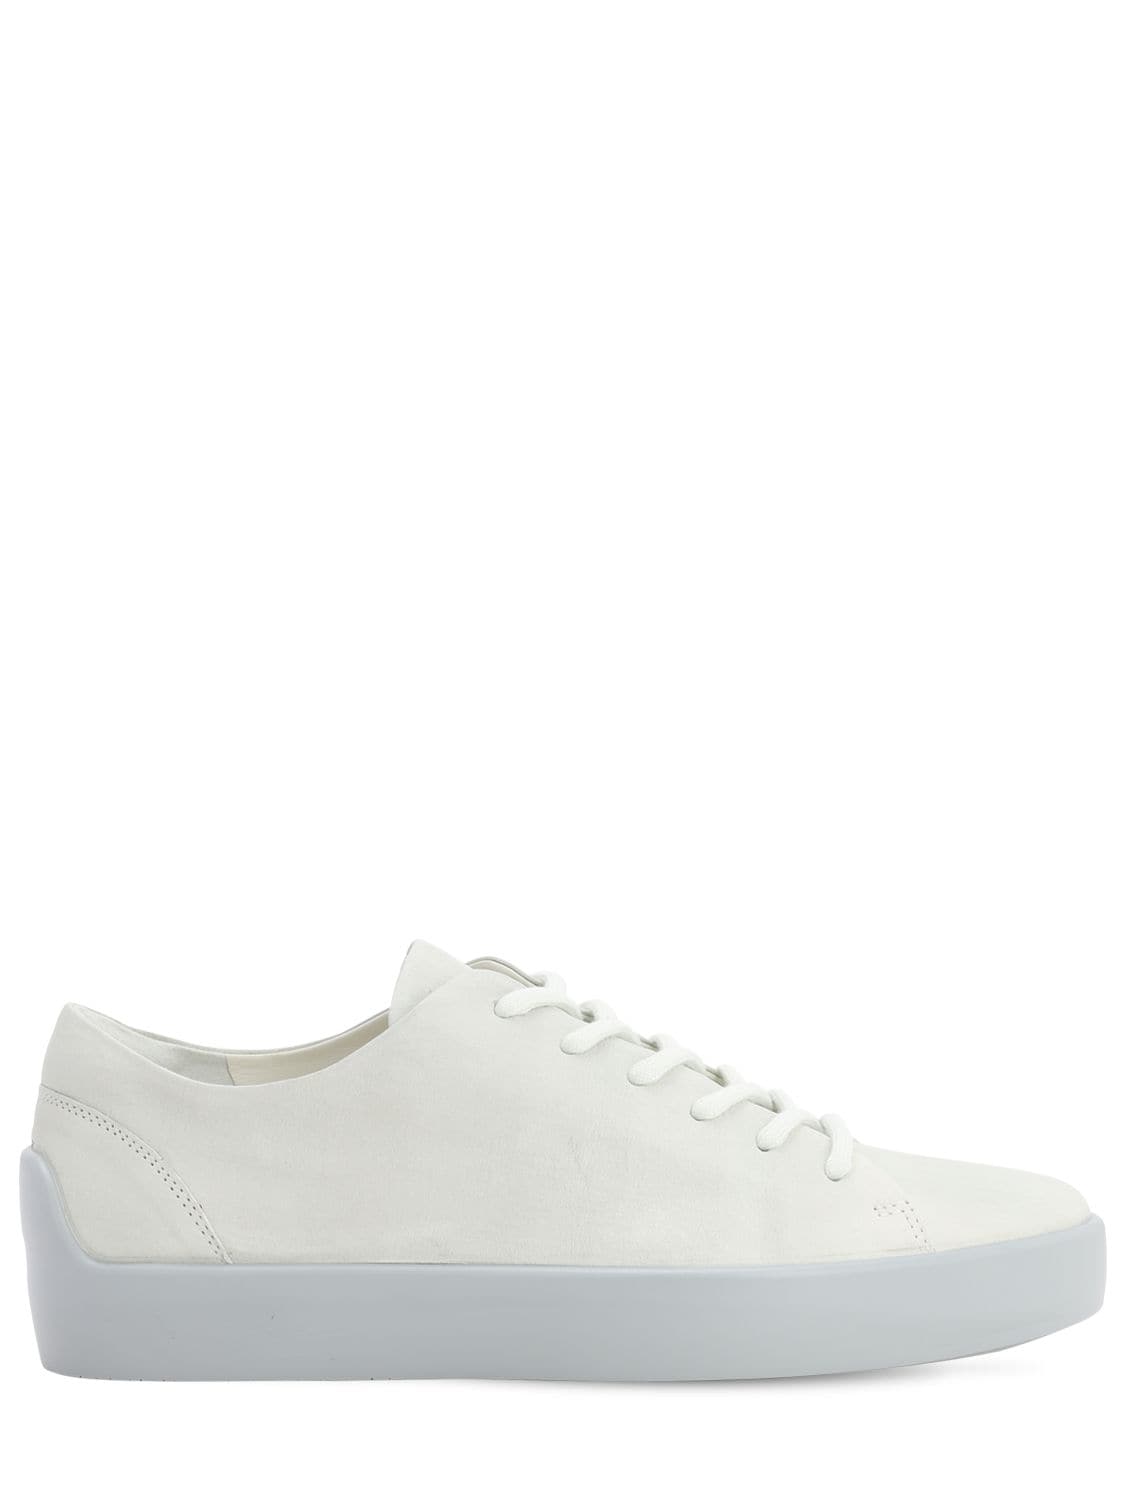 The Last Conspiracy Ecco Eik Waxed Leather Sneakers In White